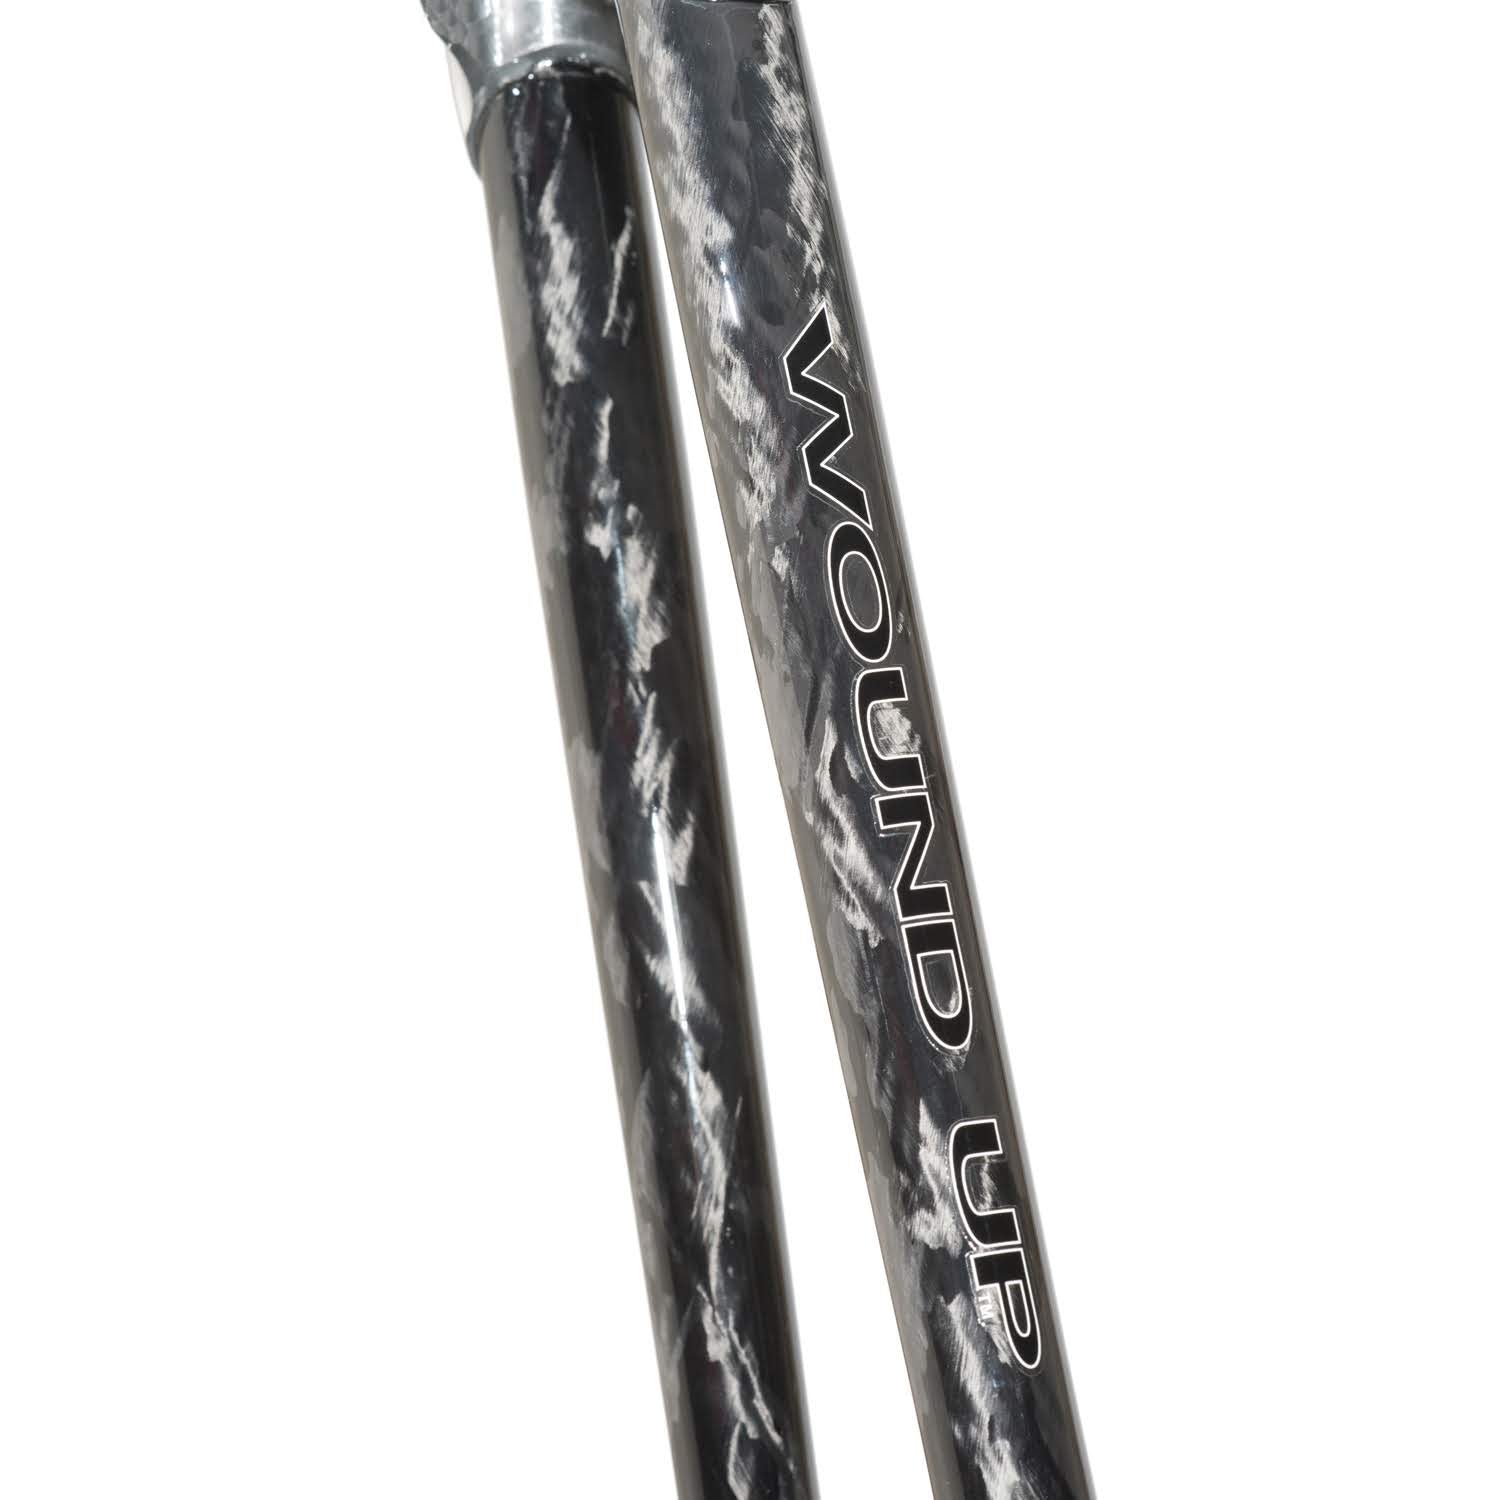 WOUND UP Road X Fork 1.5" Tapered